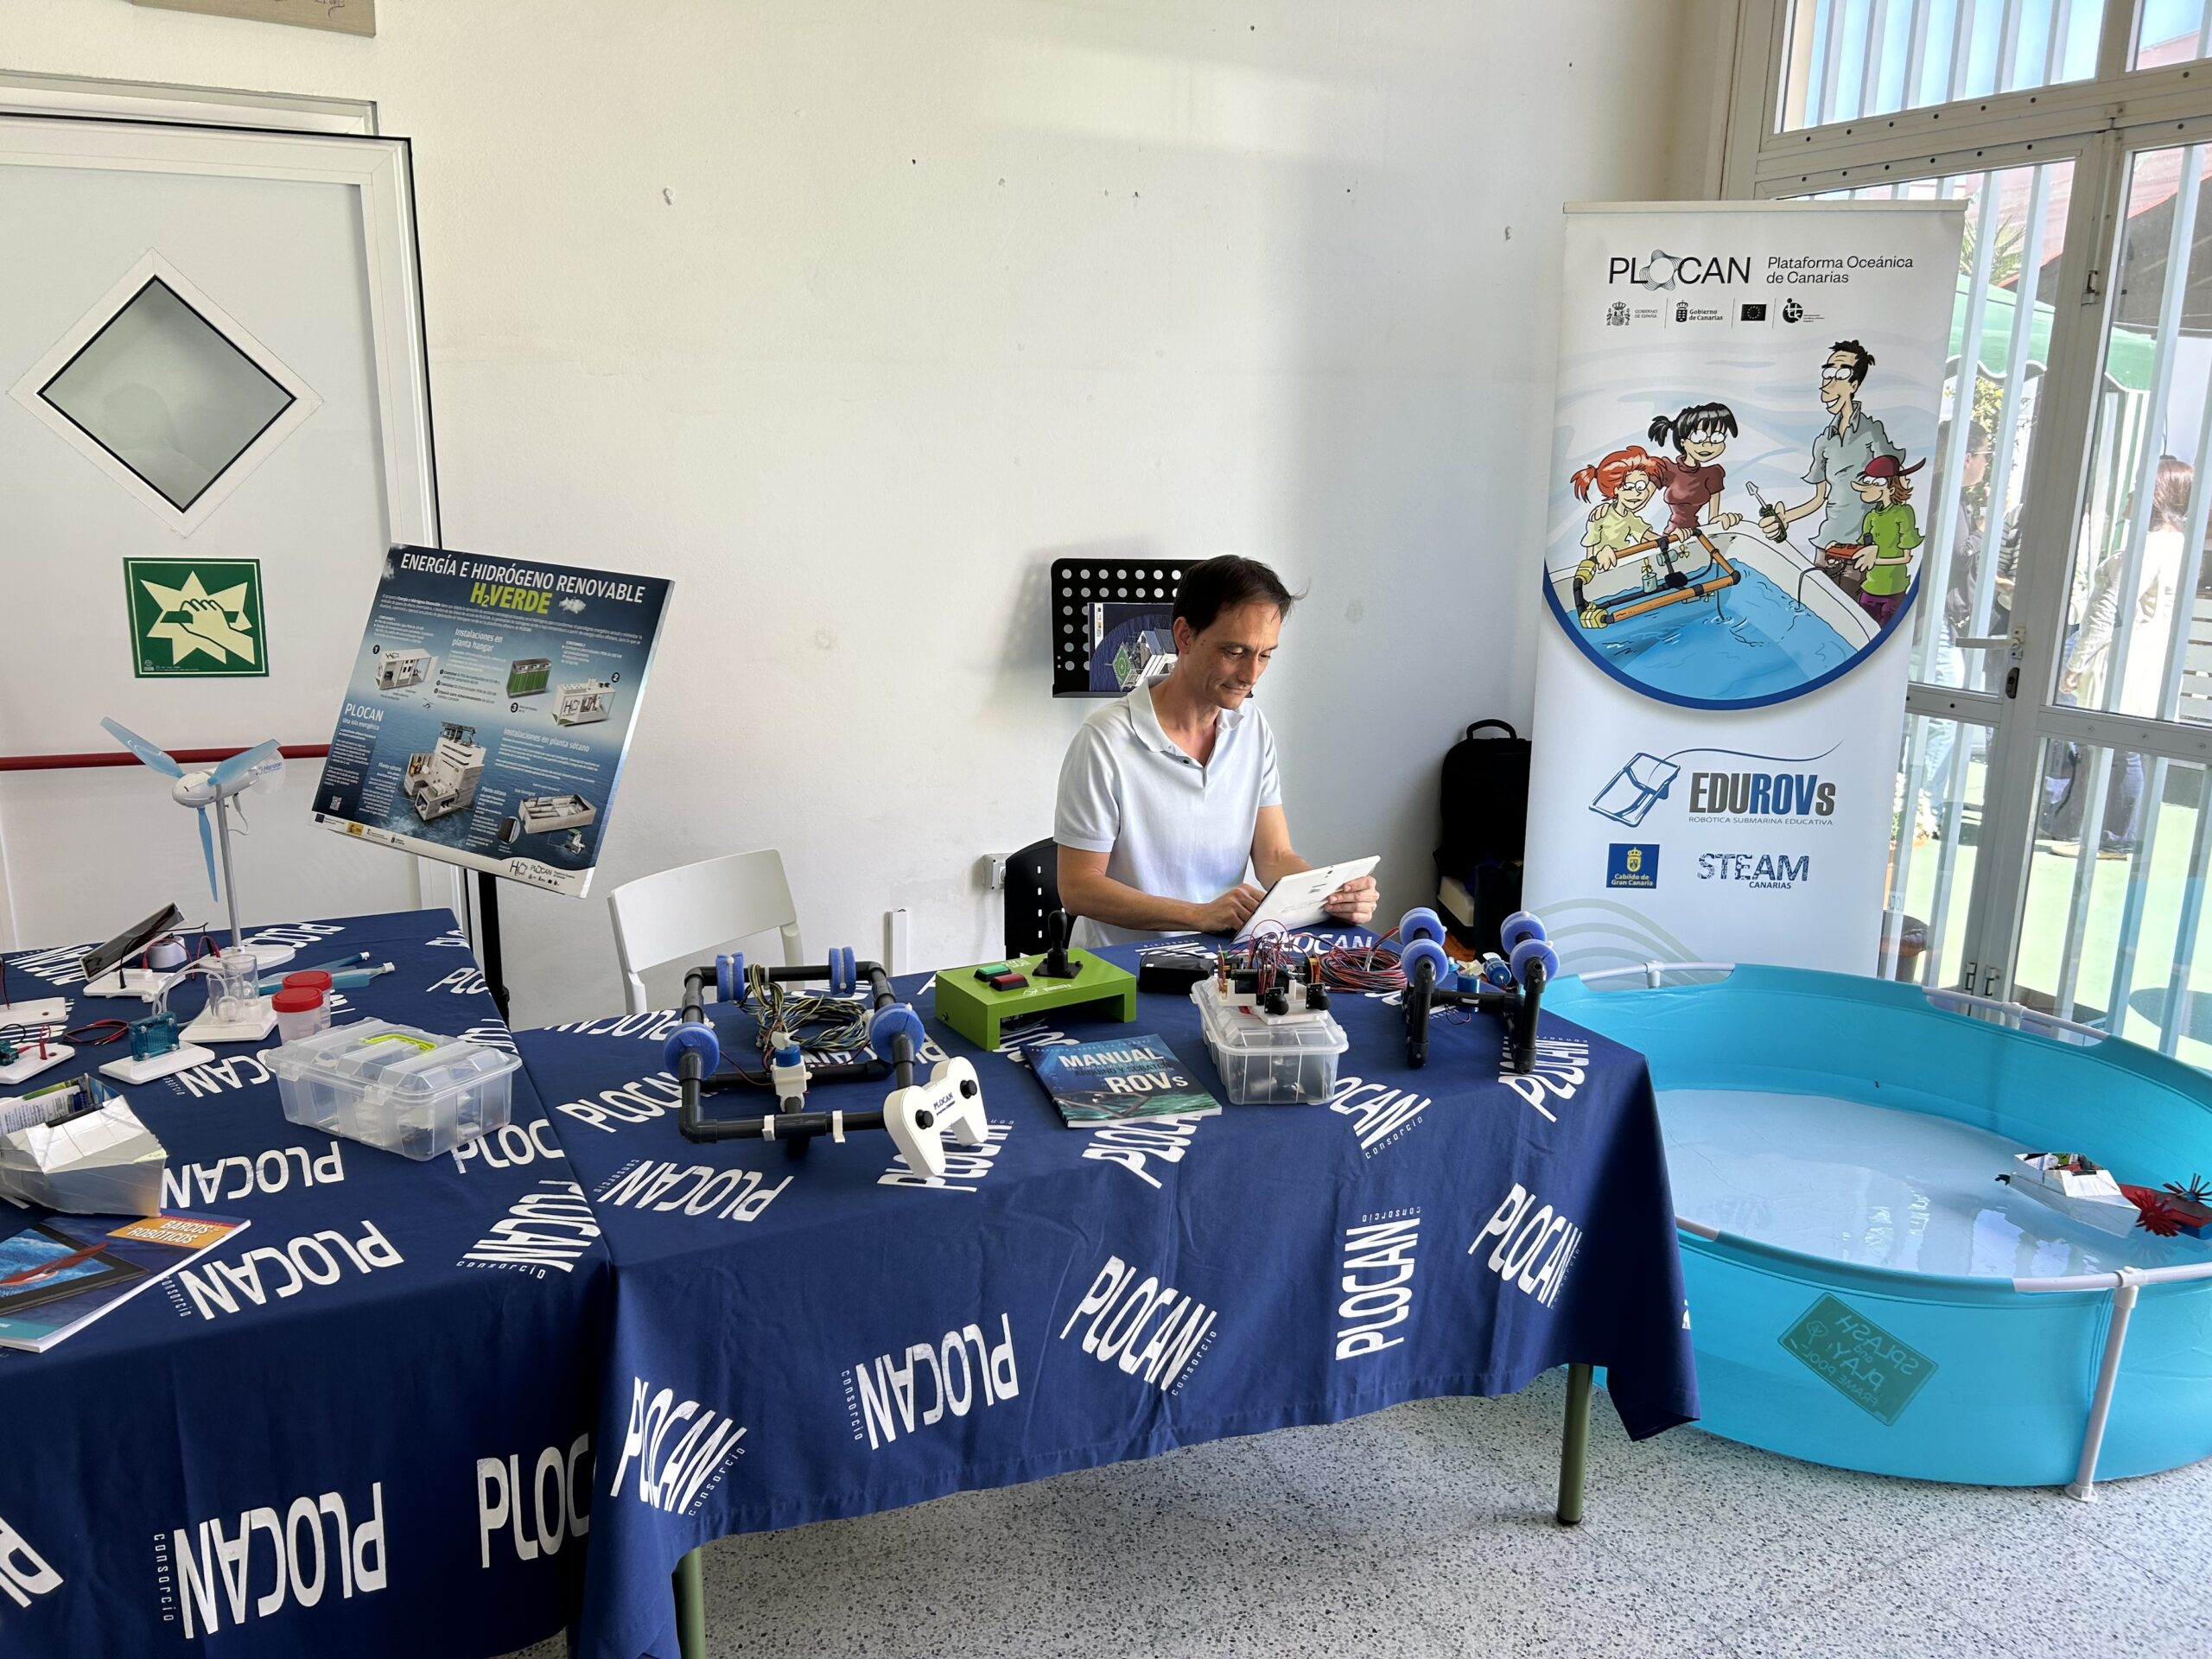 PLOCAN showcases its educational initiatives at the 2nd STEAM Conference